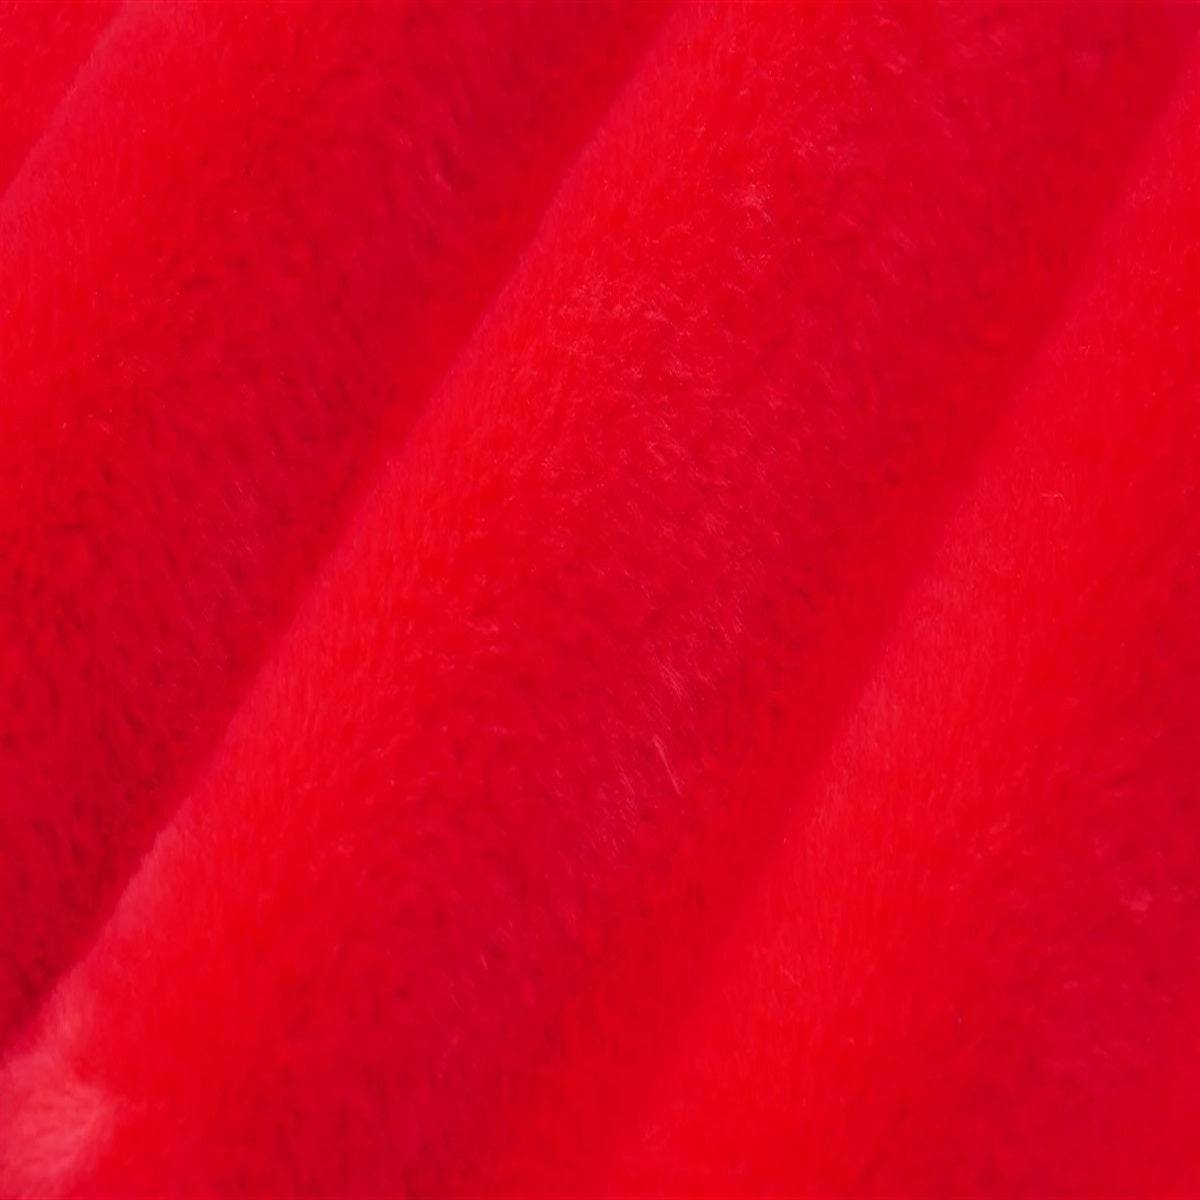 Bunny Thick Minky Fabric By The Roll (20 Yards)ICE FABRICSICE FABRICSRedBy The Yard (60 inches Wide)Bunny Thick Minky Fabric By The Roll (20 Yards) ICE FABRICS Red